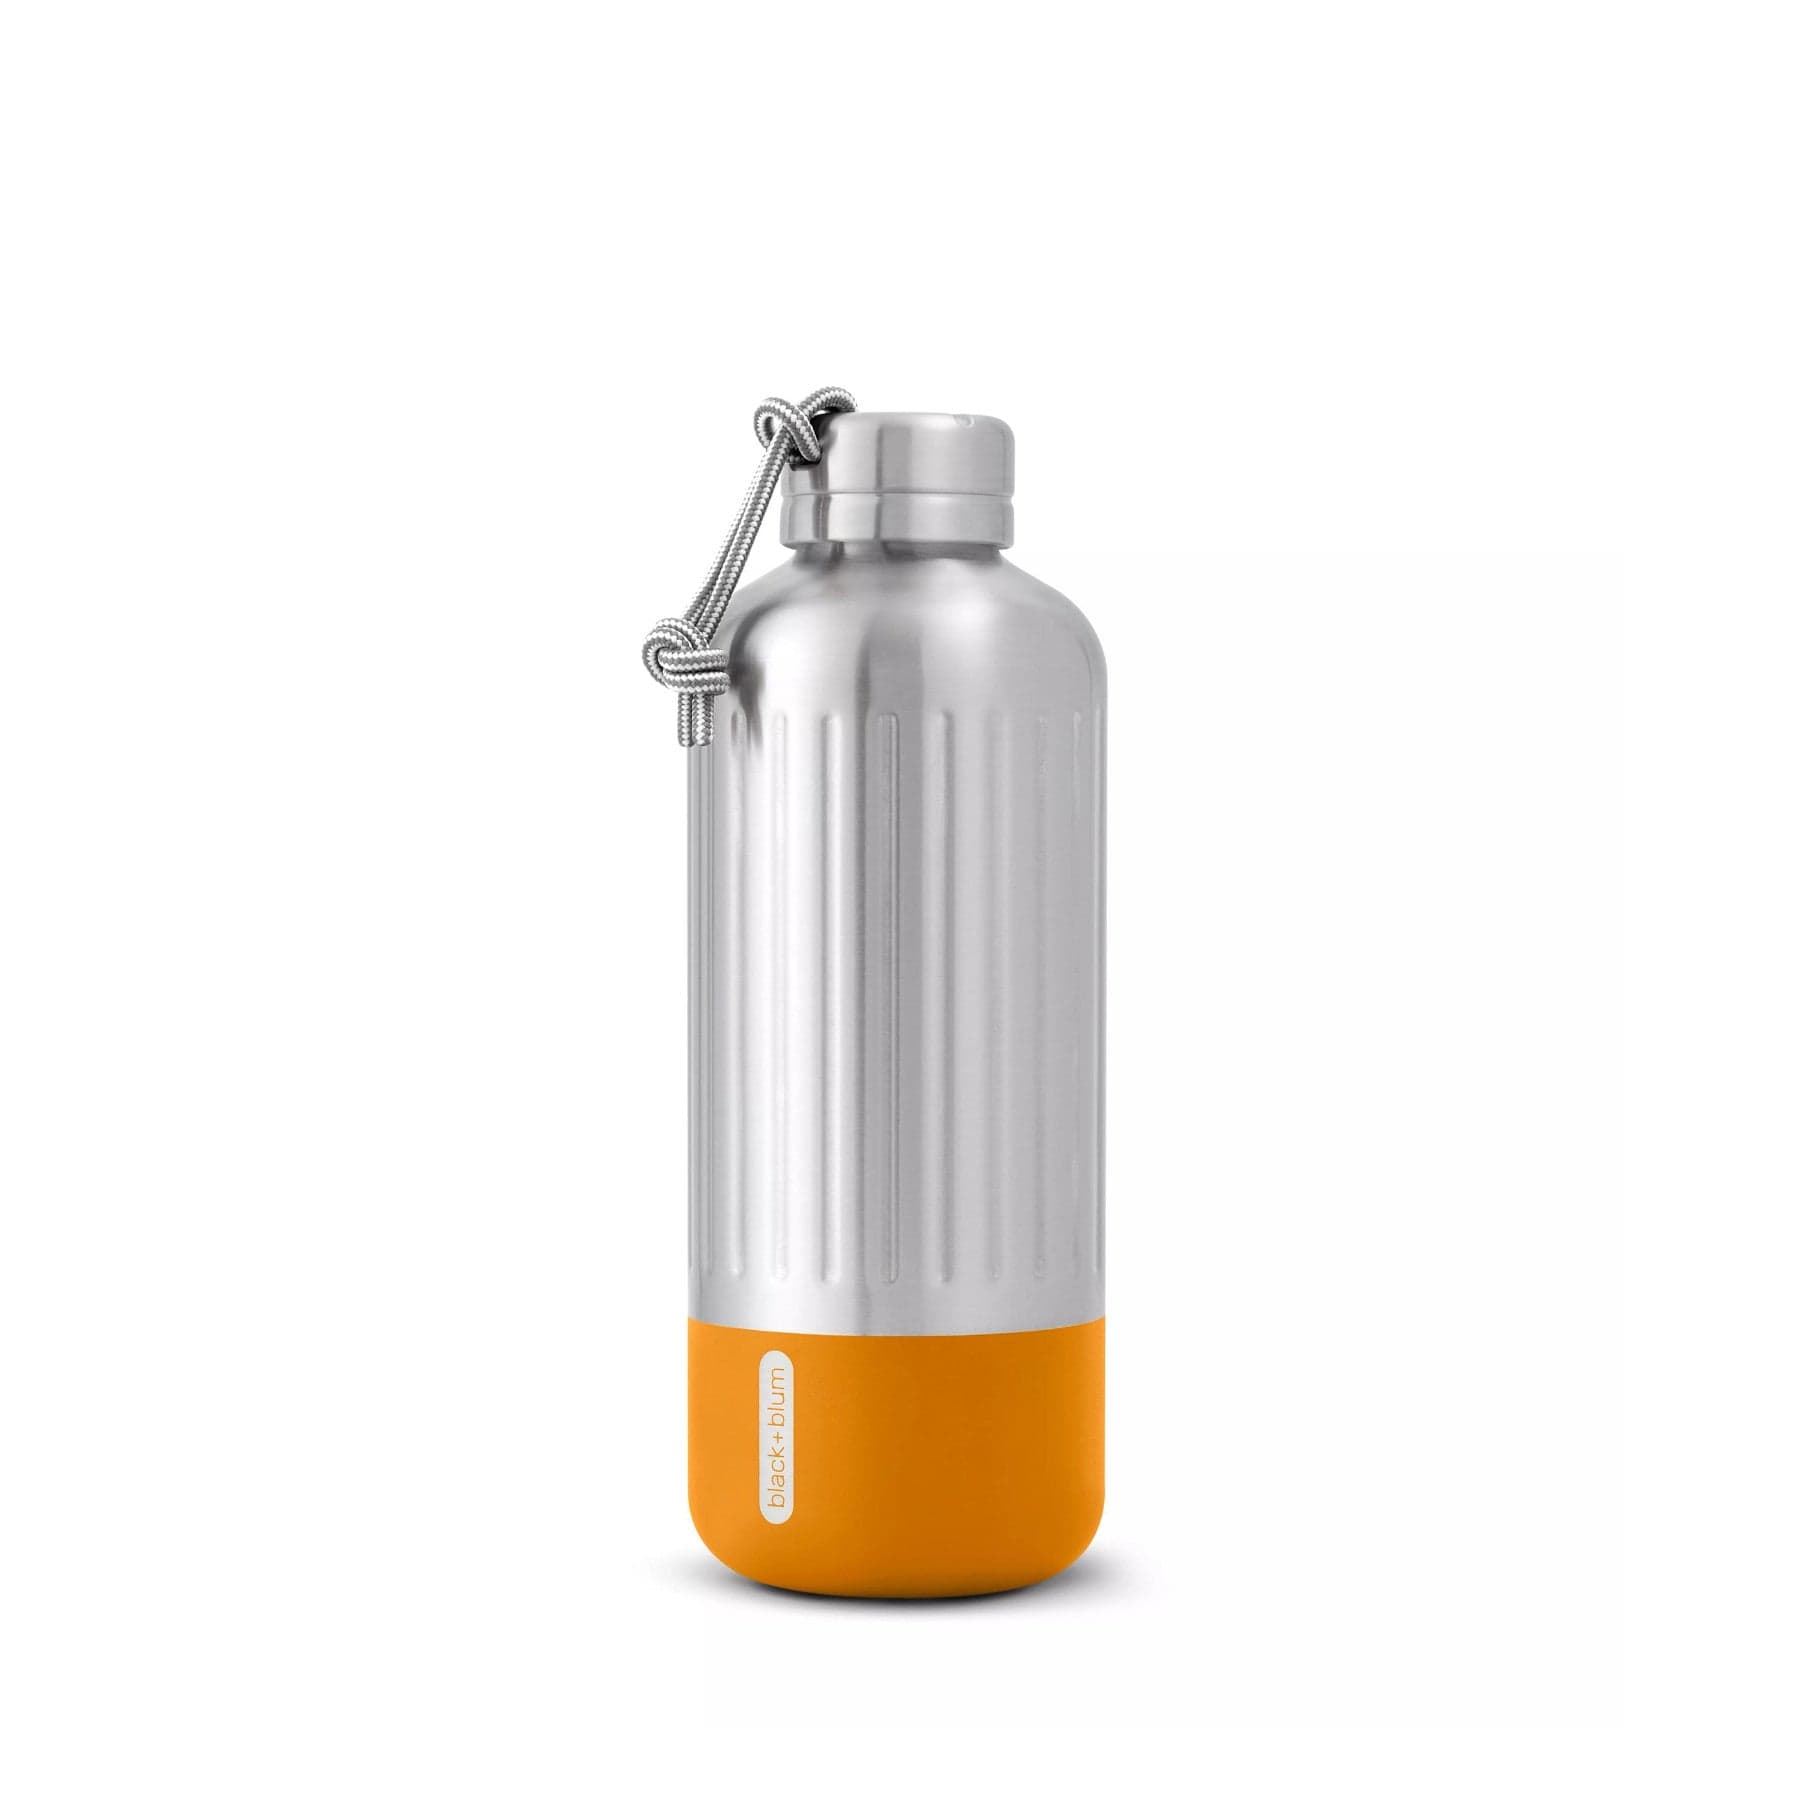 Stainless steel water bottle with orange base and carabiner on white background.